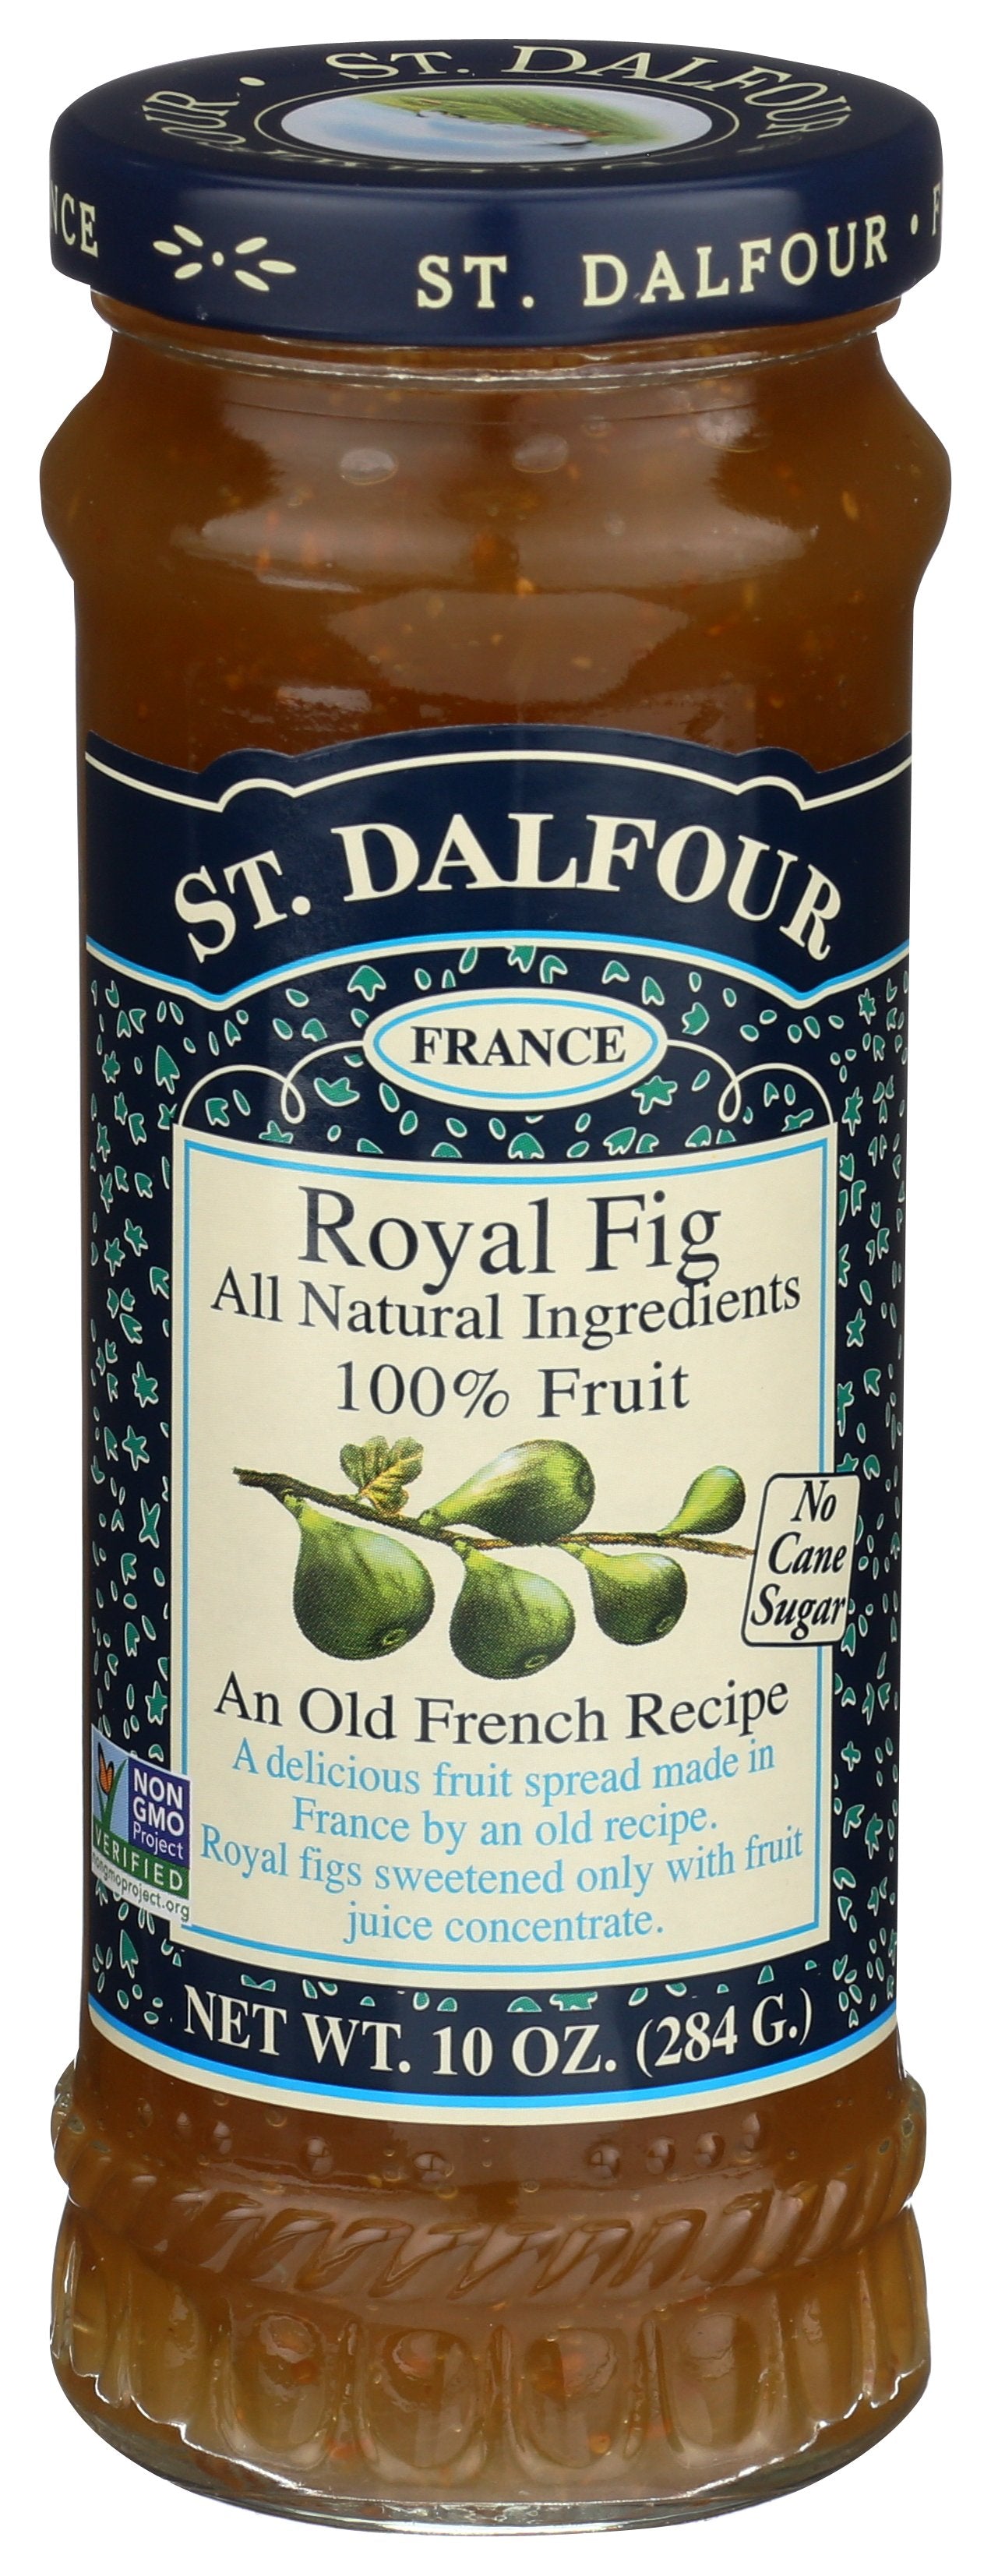 ST DALFOUR CONSERVE ROYAL FIG - Case of 6